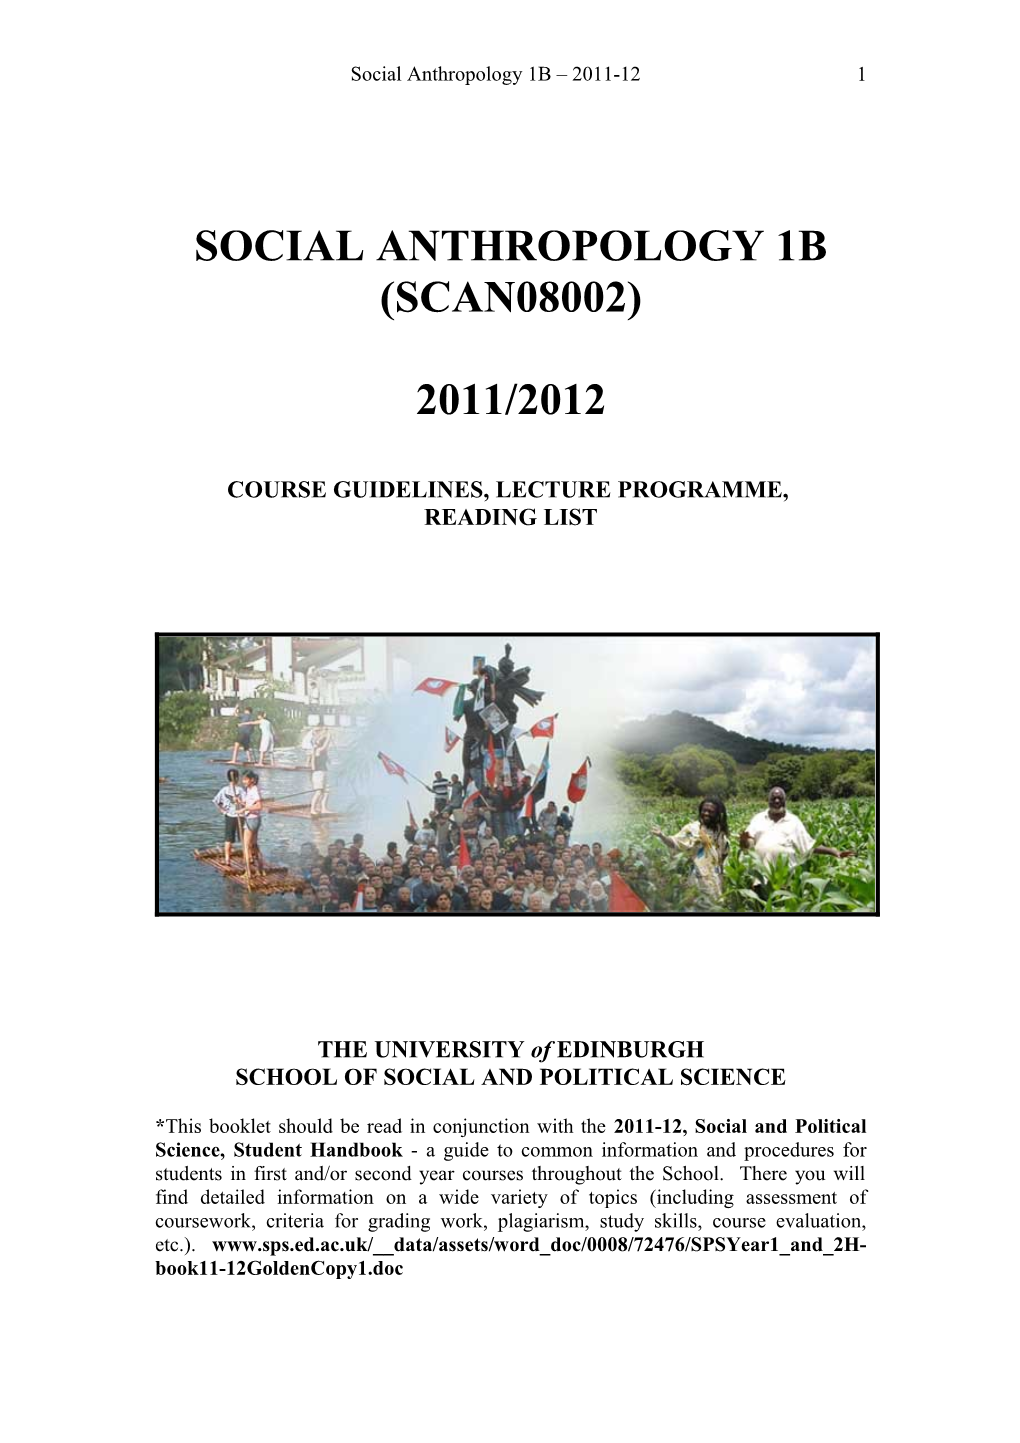 Social Anthropology 1B: an Introduction